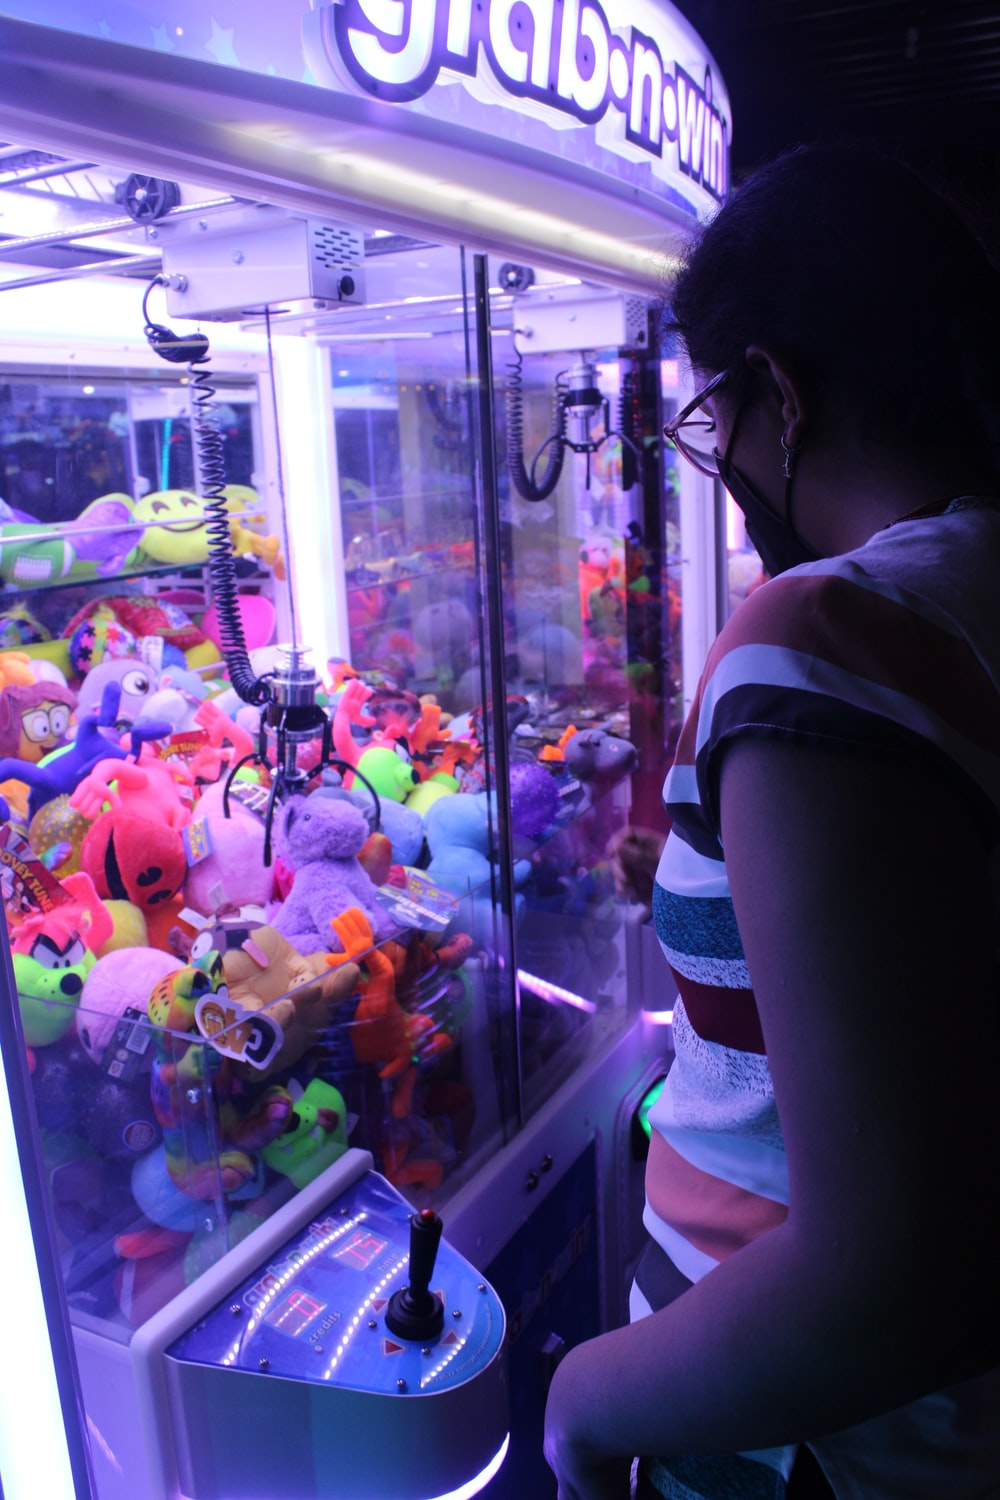 Claw Machine Picture. Download Free Image